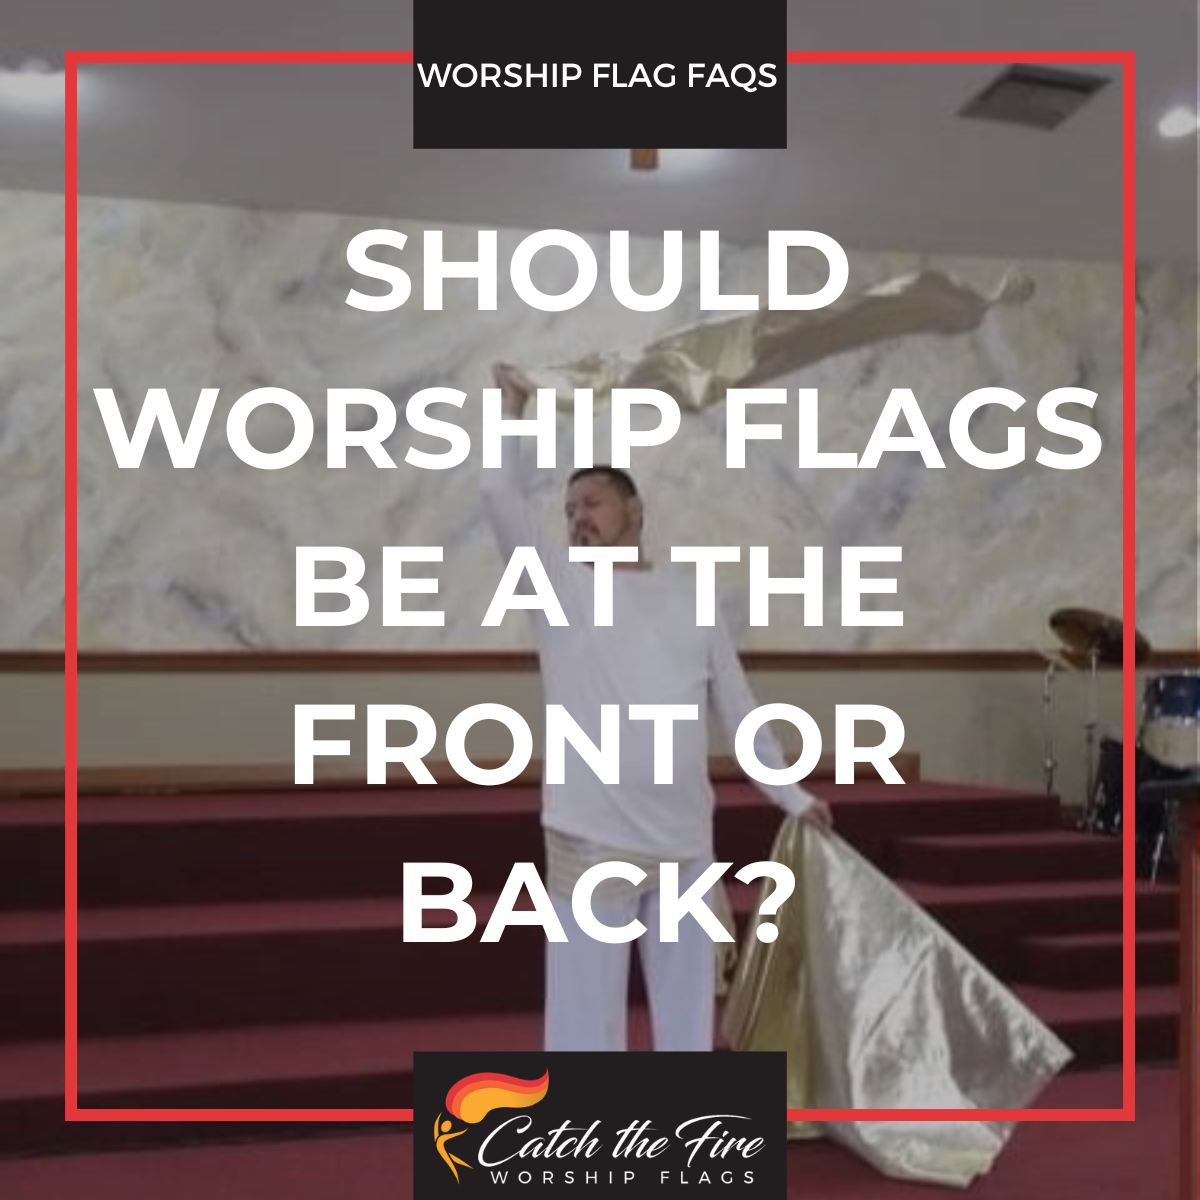 Should Worship Flags Be at the Front or Back?